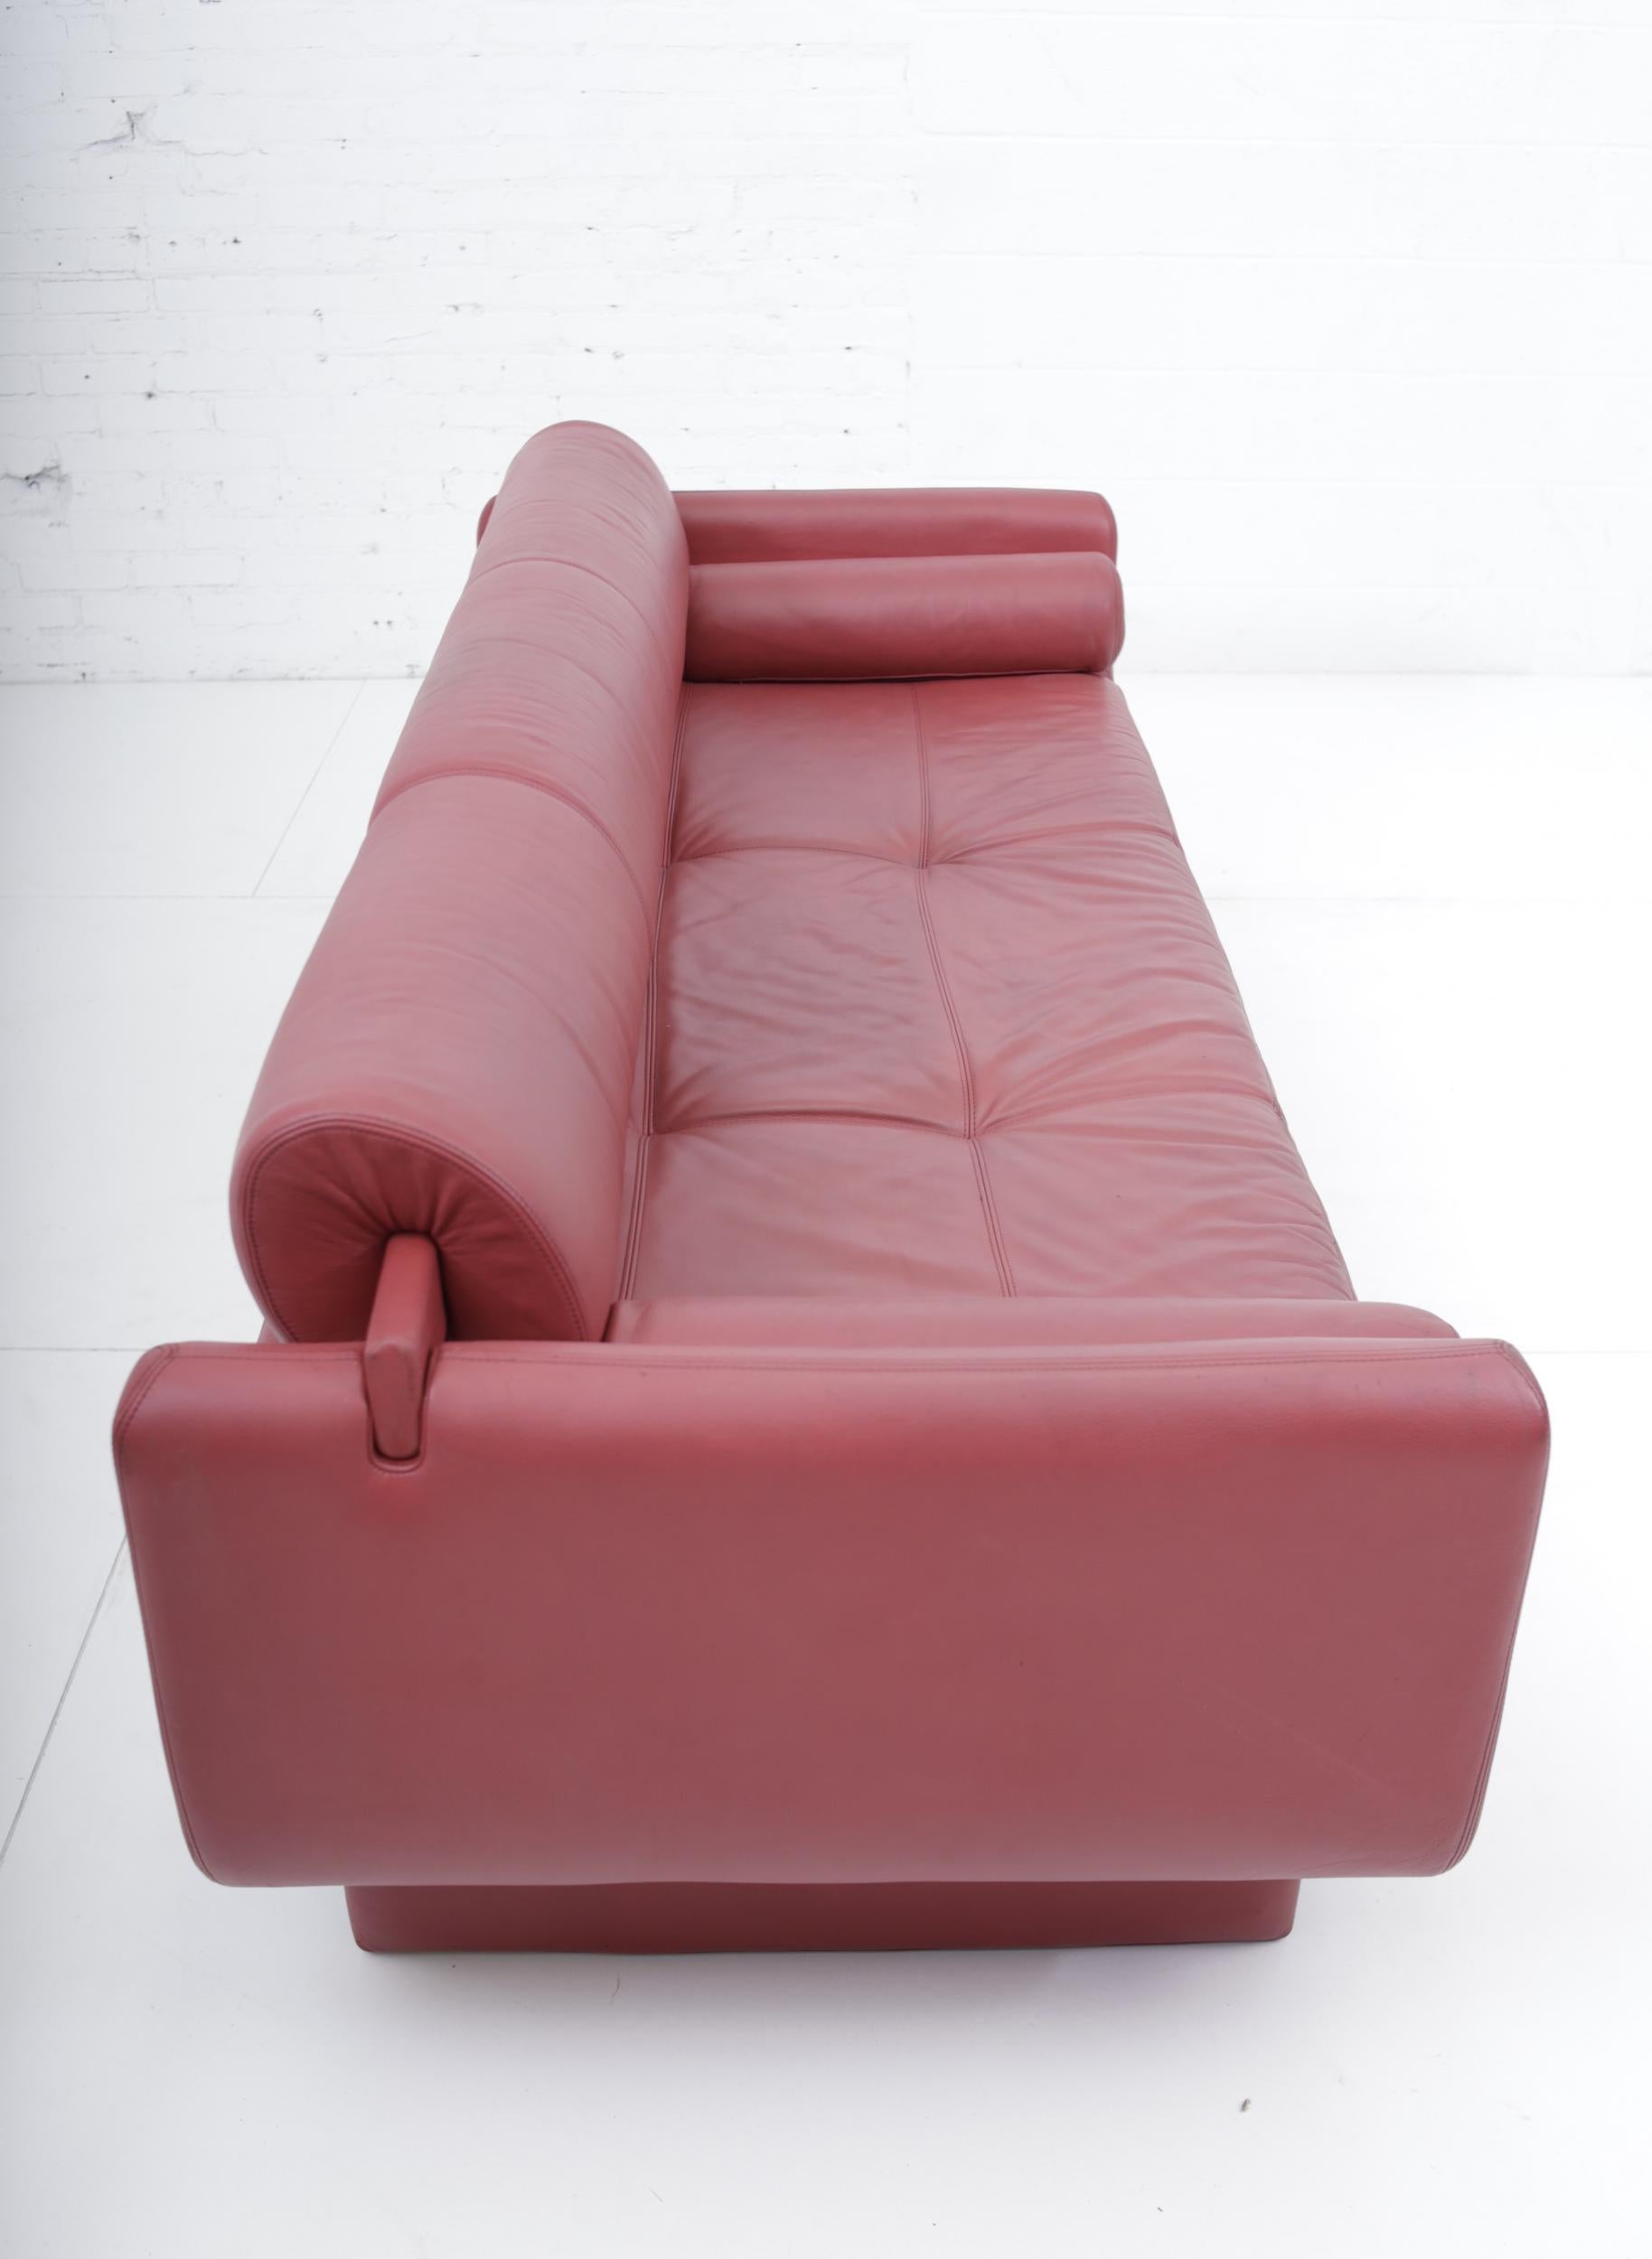 20th Century Vladimir Kagan Red Leather “Matinee” Sofa Daybed